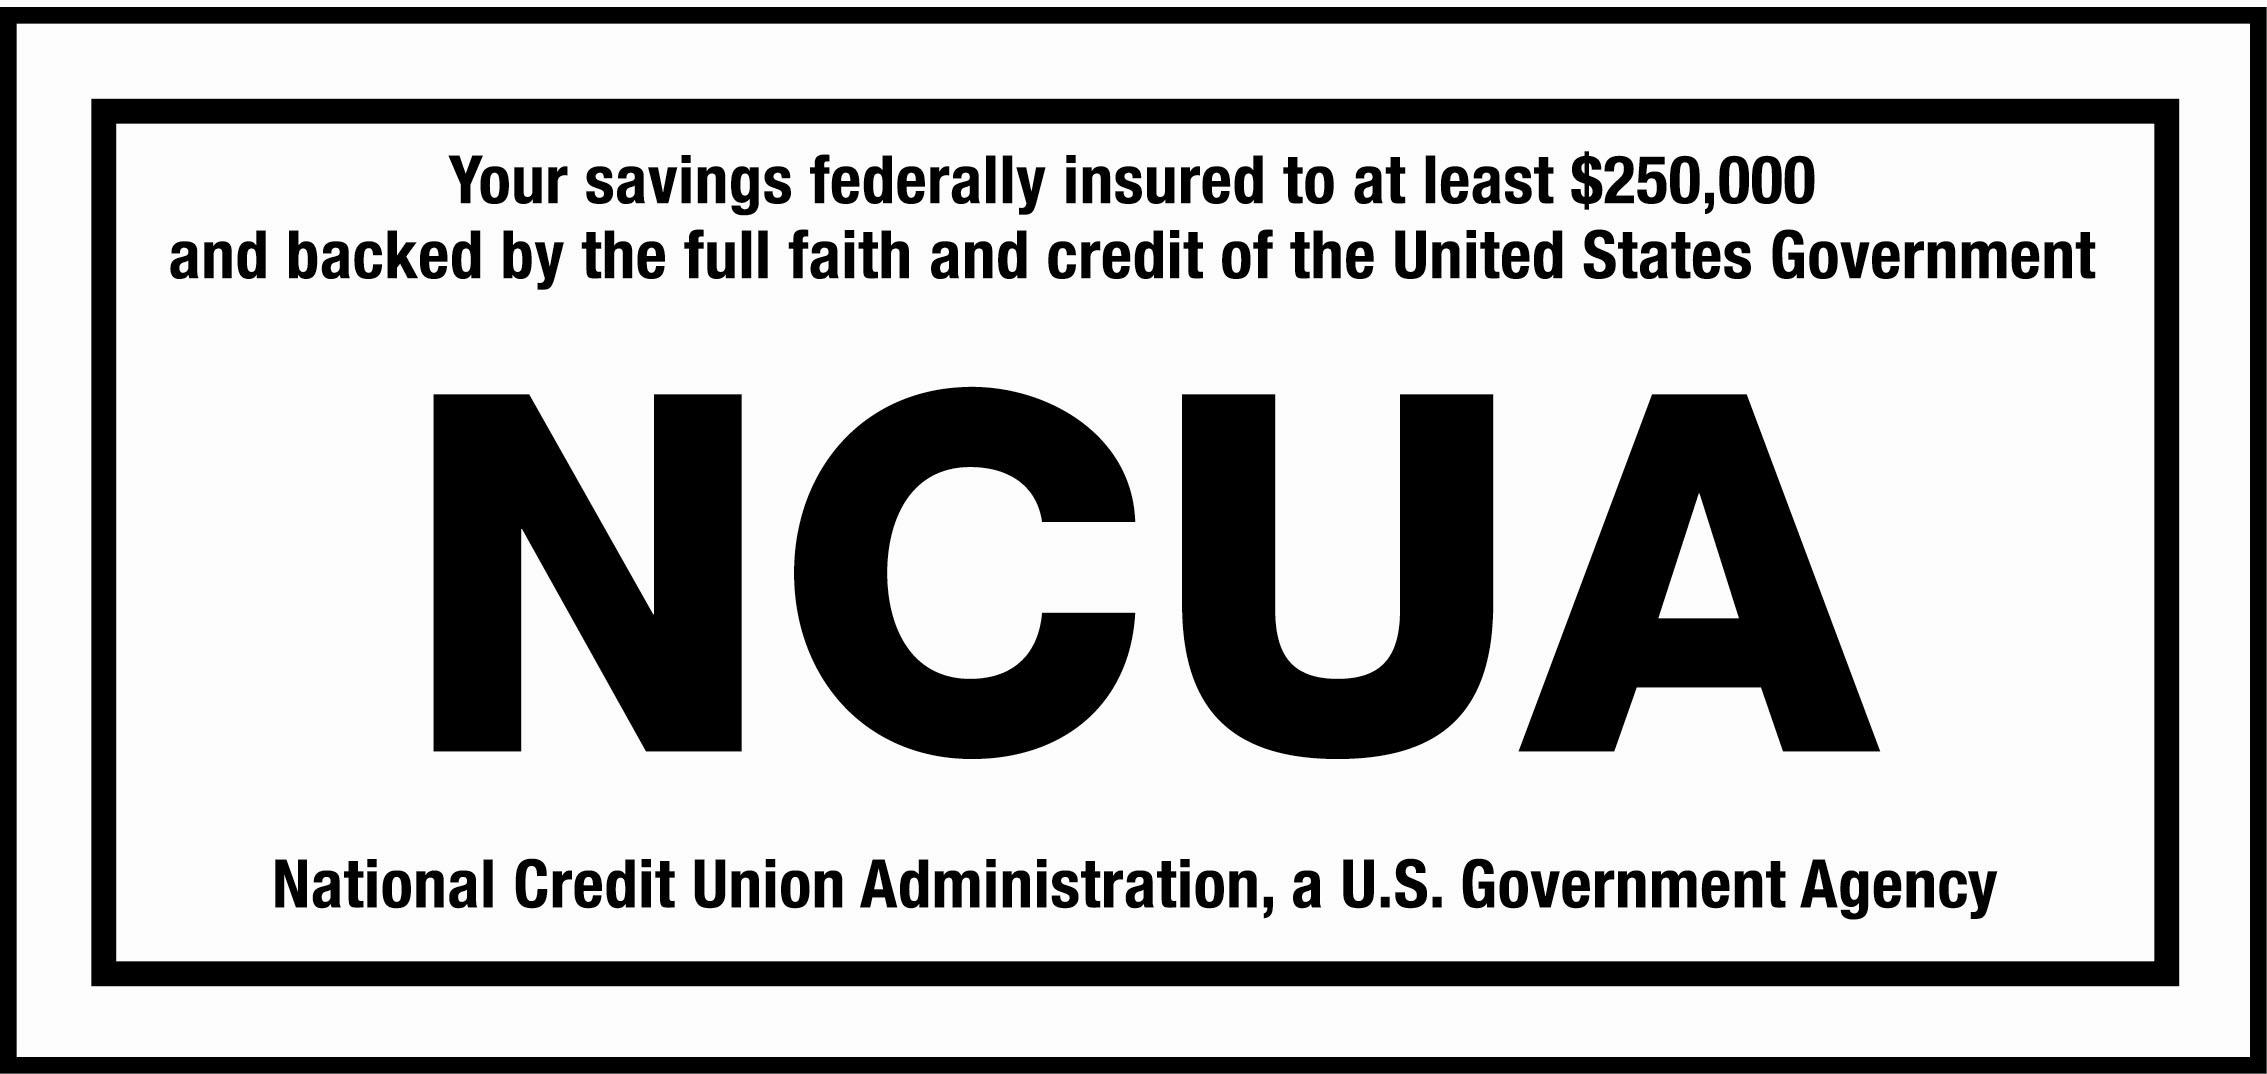 Your savings federally insured to at least $250,000 and backed by the full faith and credit of the United States Government. NCUA National Credit Union Administration, a U.S. Government Agency.